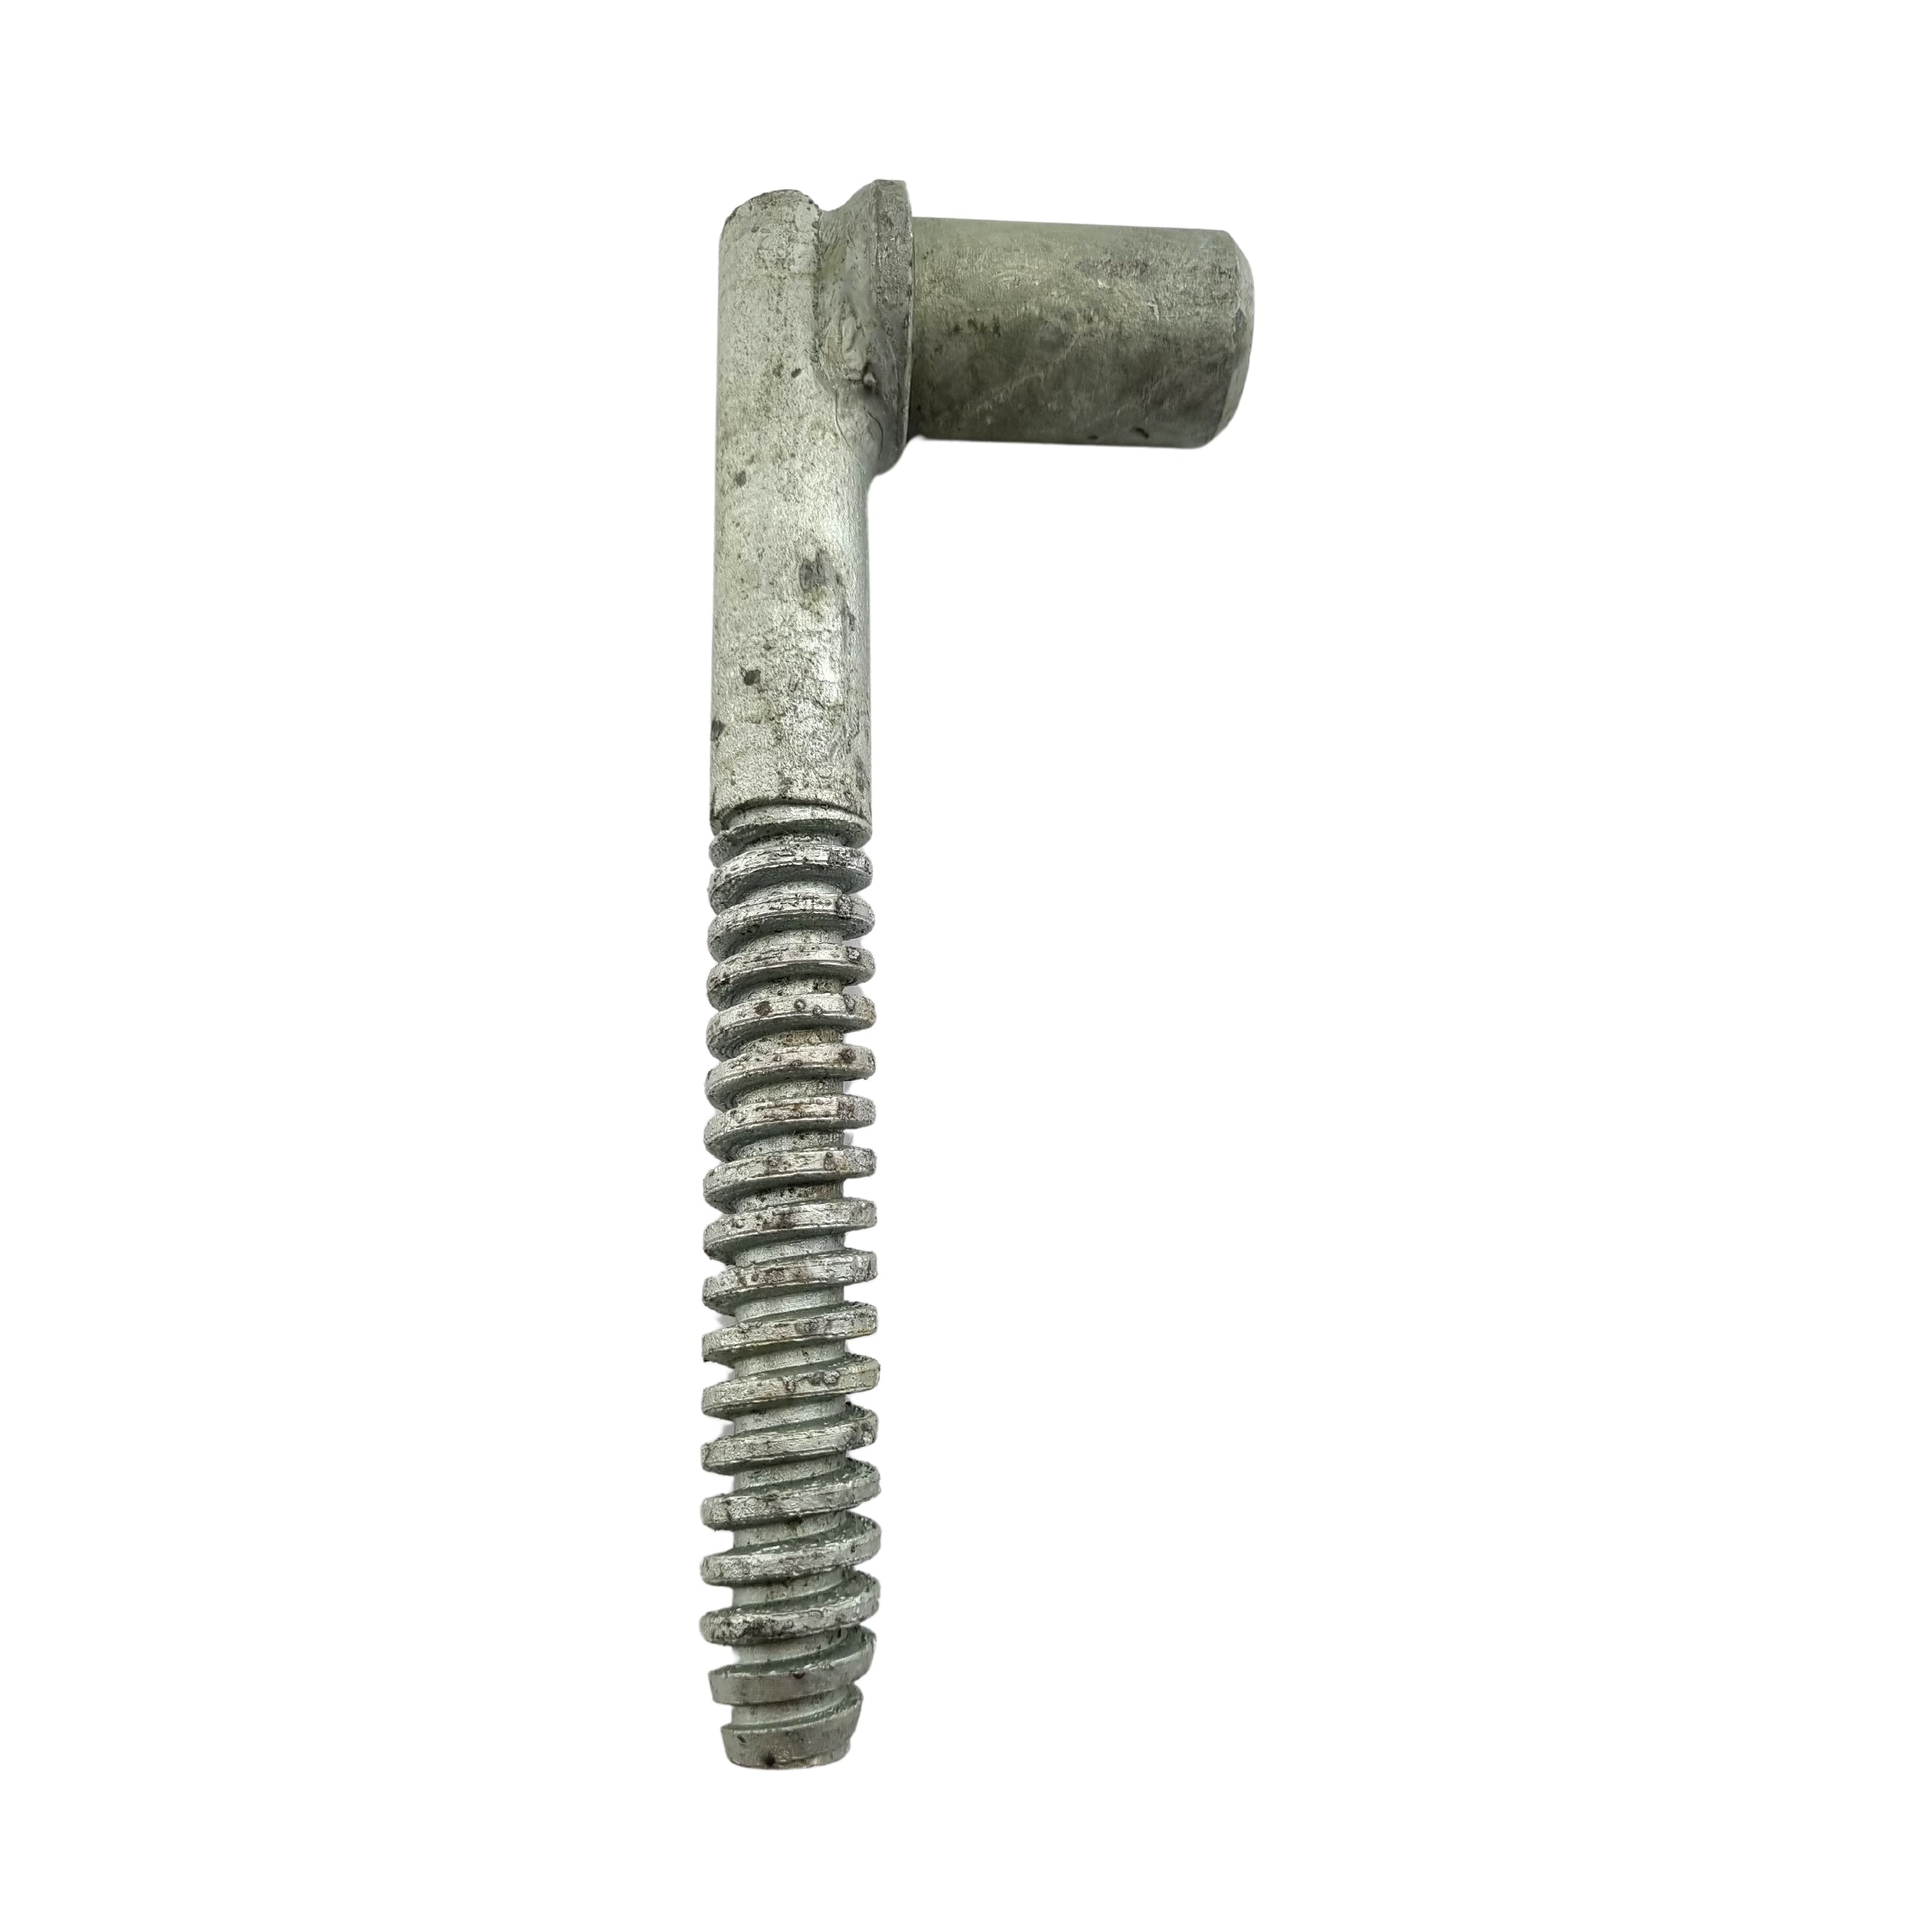 Timber Post Gudgeon - Screw In - Galvanised. Fence & Gate Fittings. Shop online chain.com.au. Australia wide shipping.